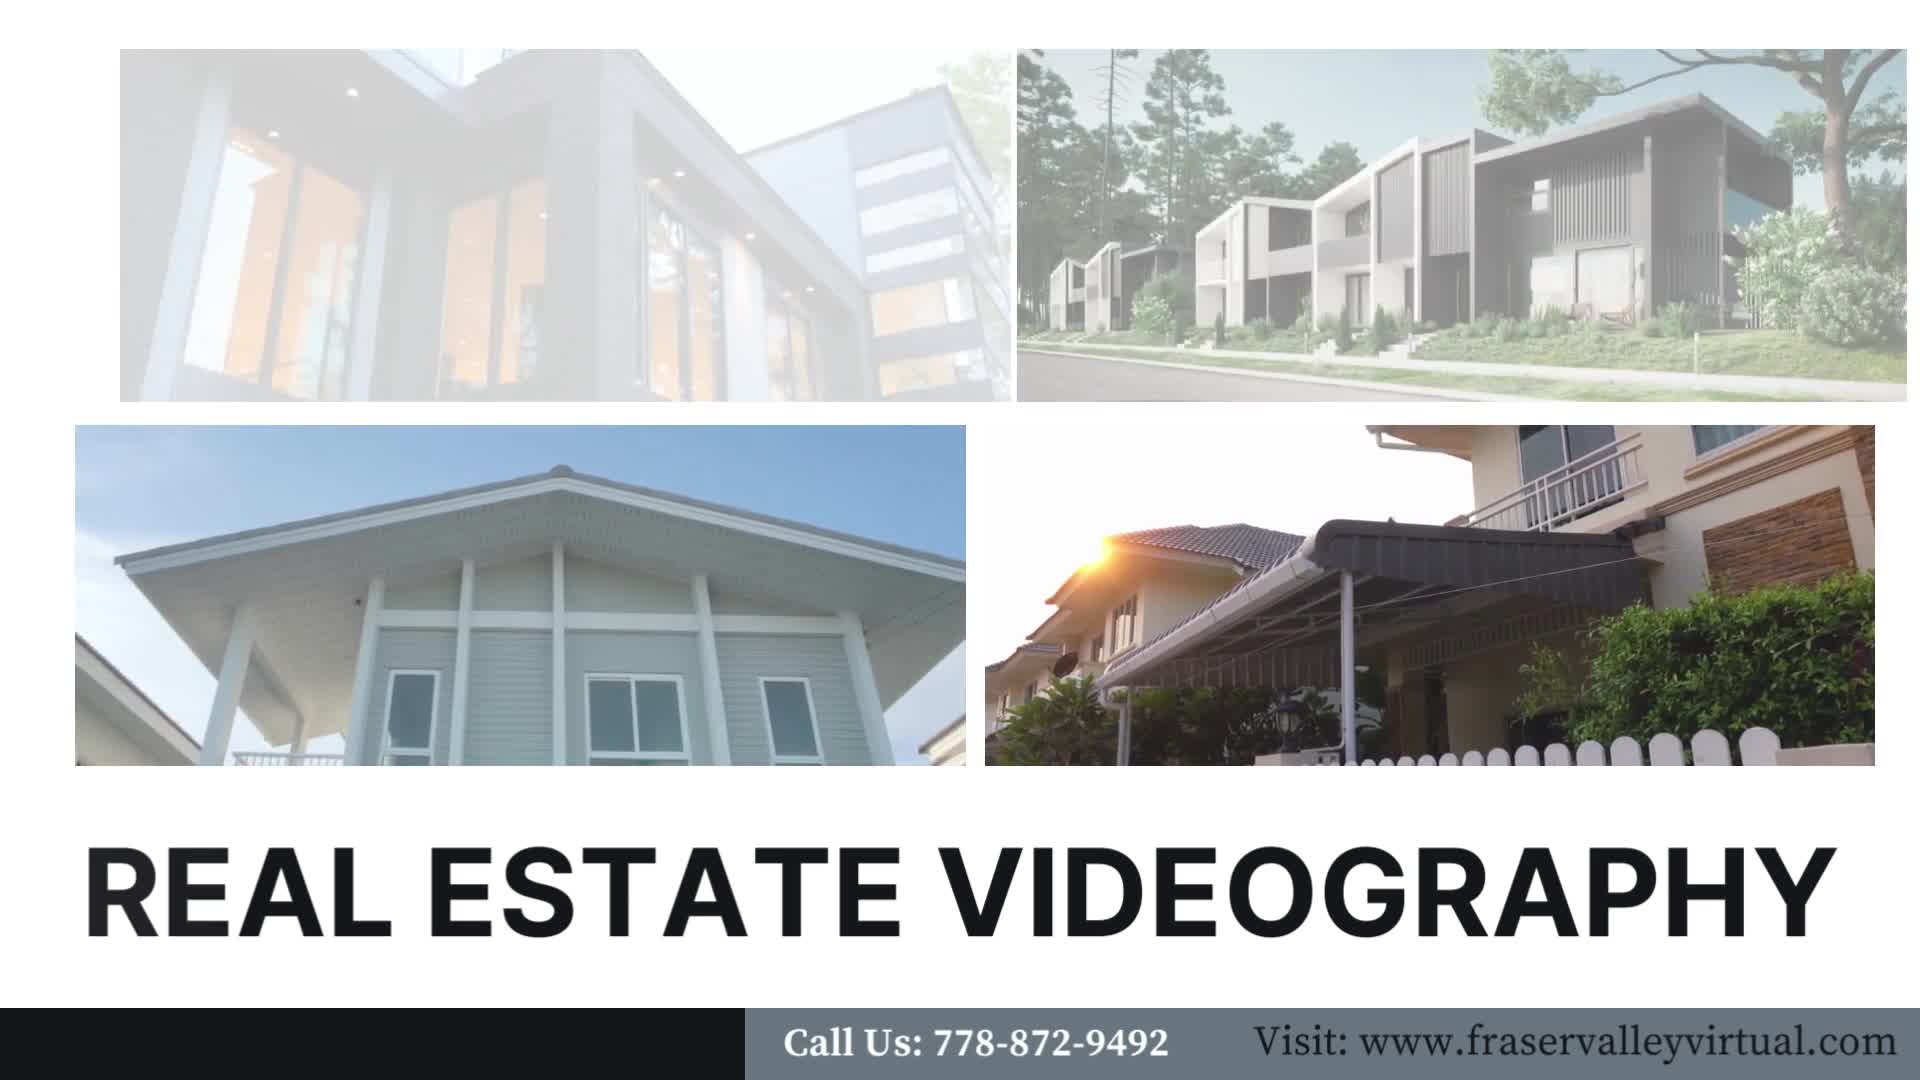 Need professional videography for your commercial real estate?